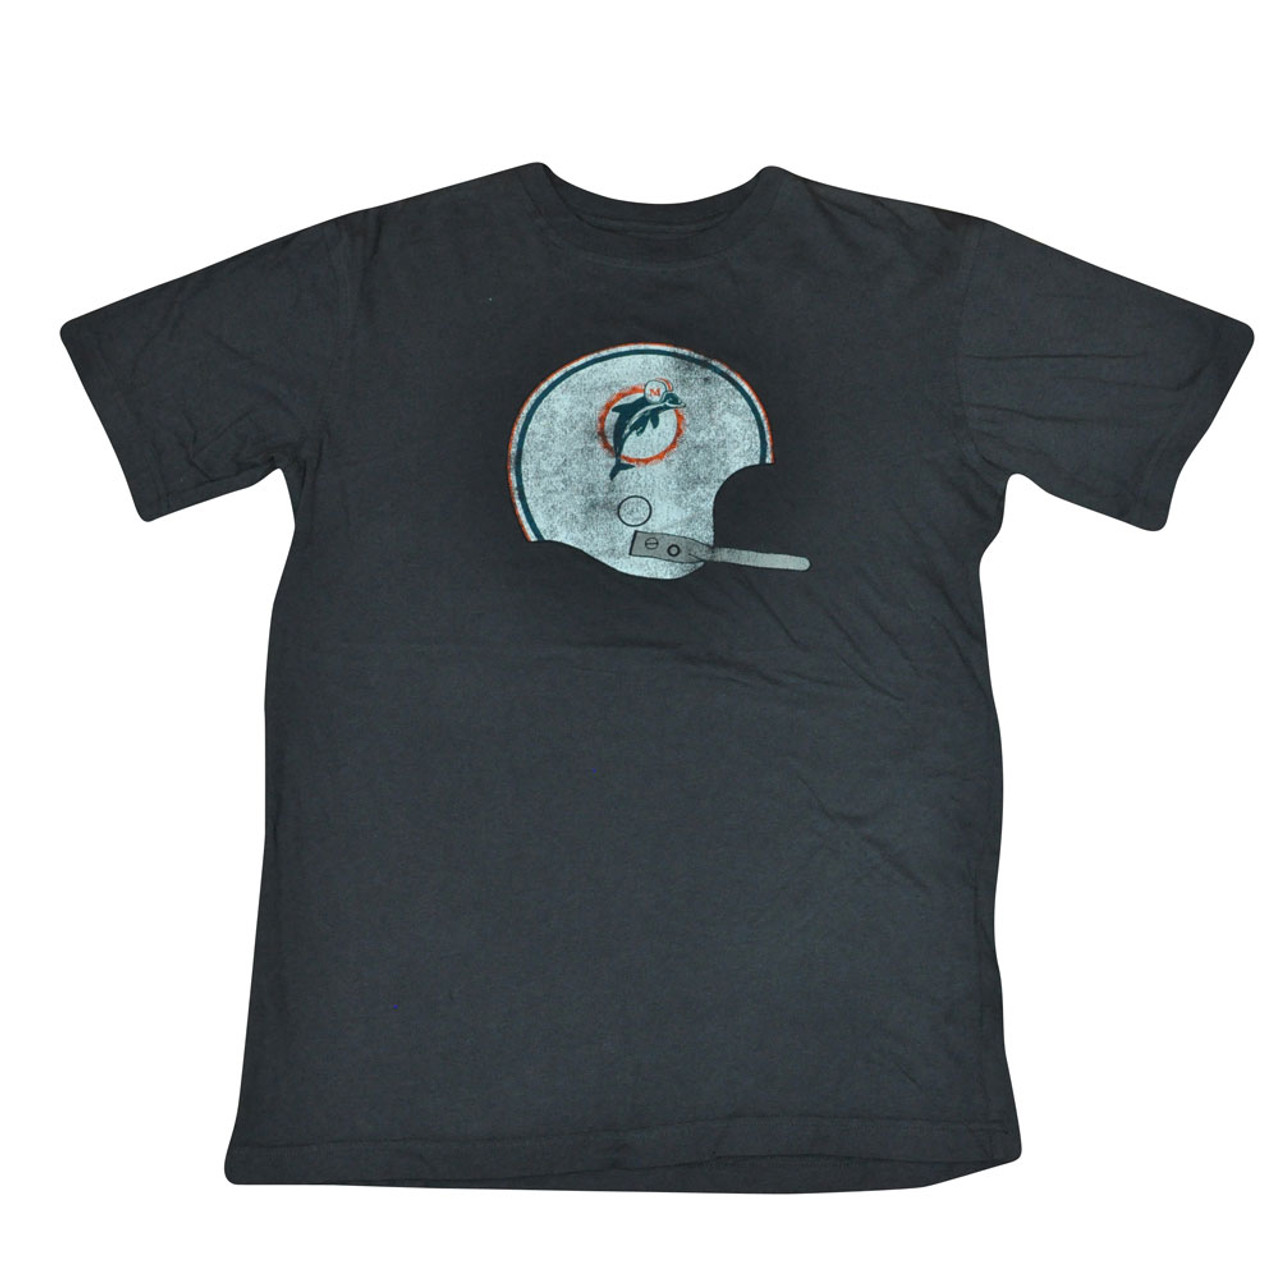 miami dolphins youth shirts